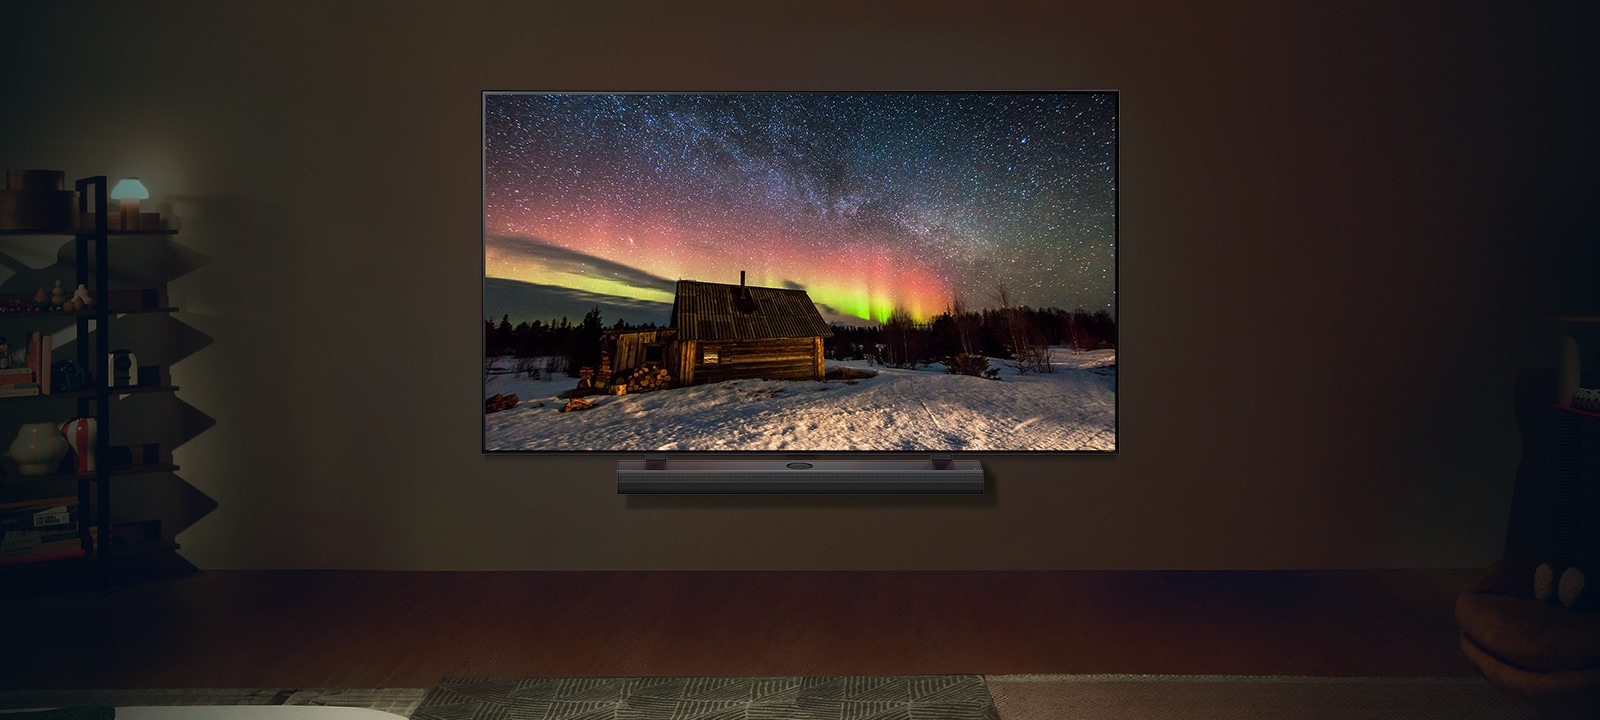 LG TV and LG Soundbar in a modern living space in nighttime. The screen image of the aurora borealis is displayed with the ideal brightness levels.	